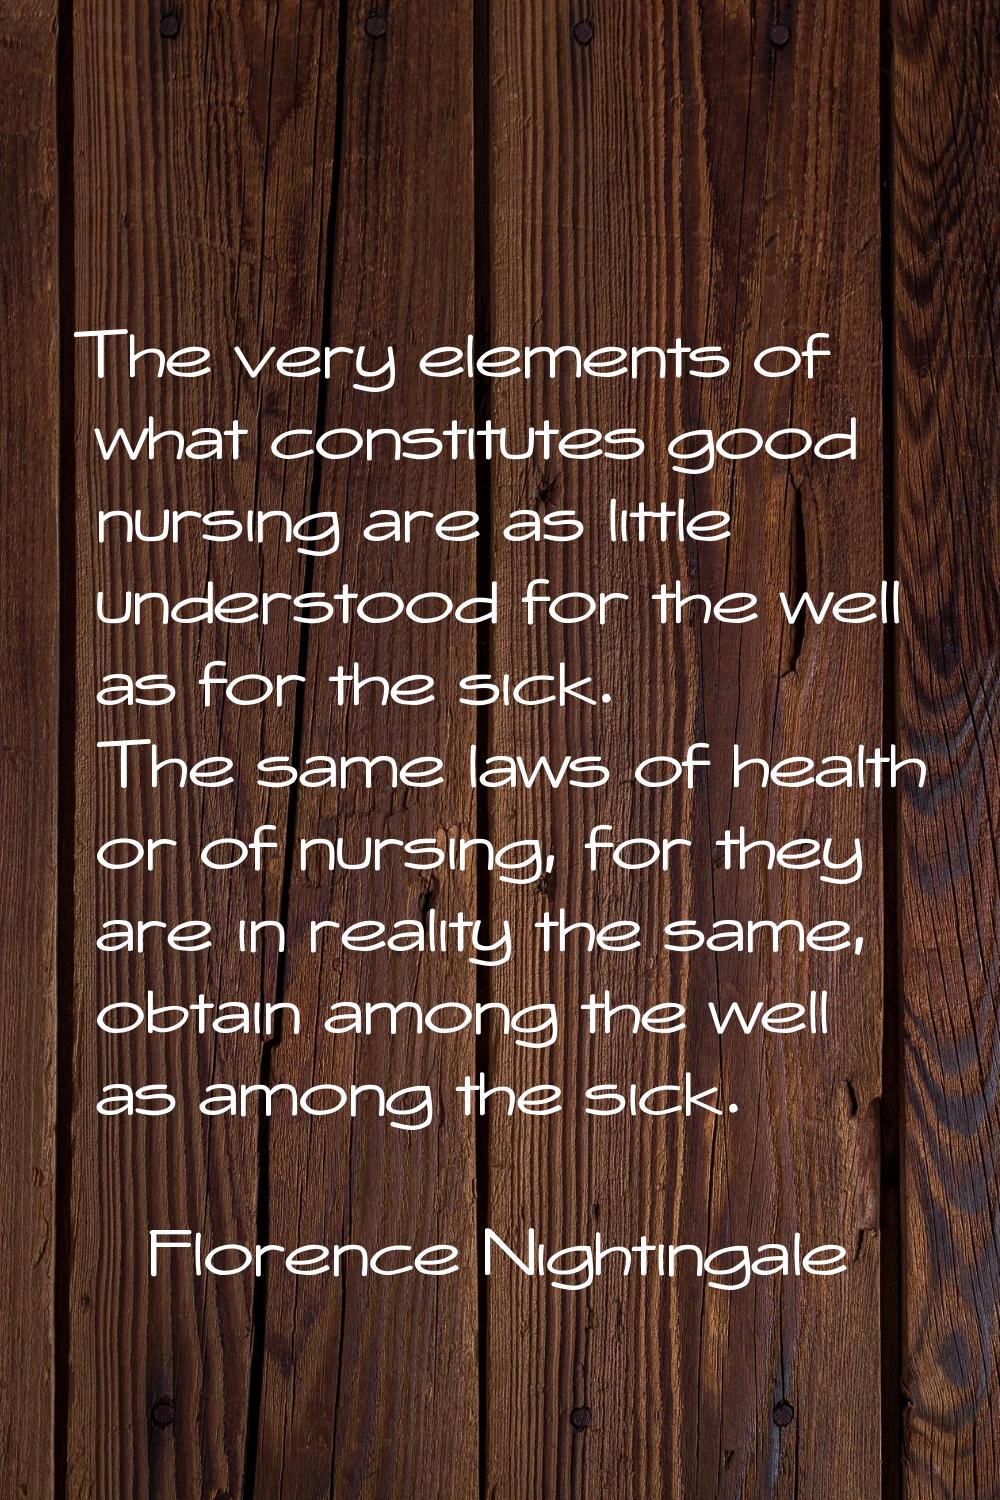 The very elements of what constitutes good nursing are as little understood for the well as for the